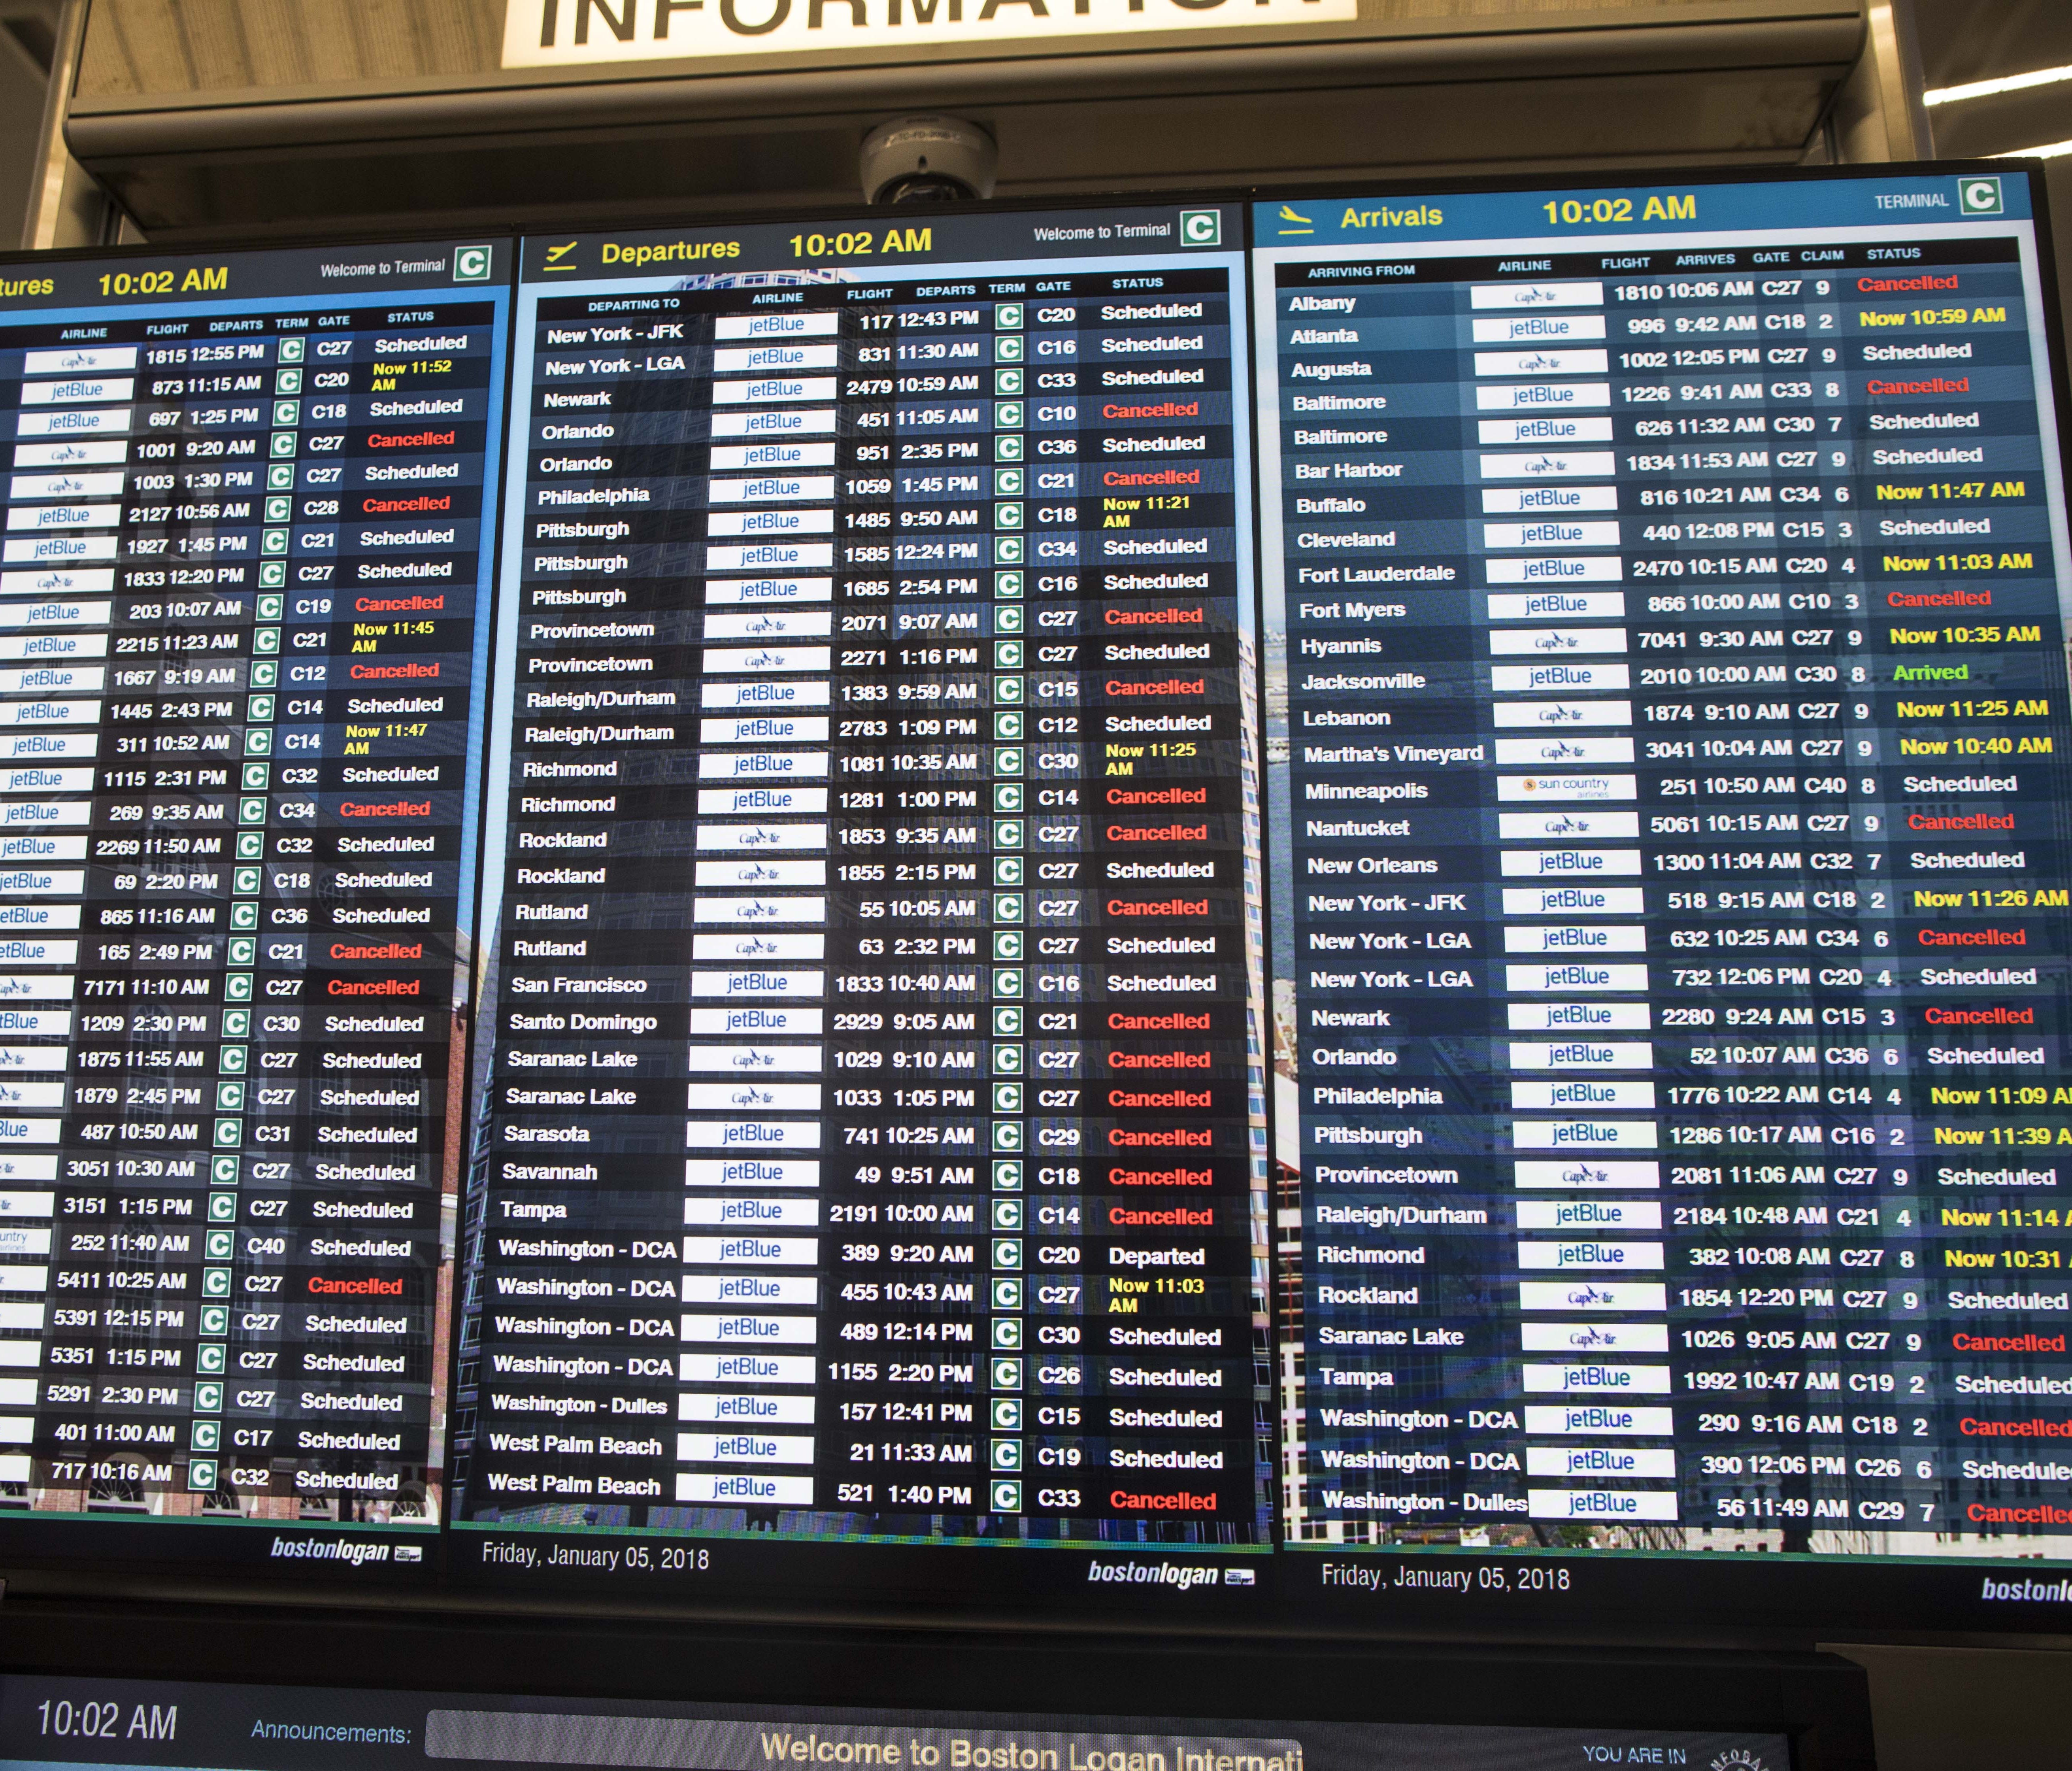 This file photo from Jan. 5, 2018, shows many delays and cancellations on a flight display board at Boston's Logan International Airport amid an earlier snow storm.